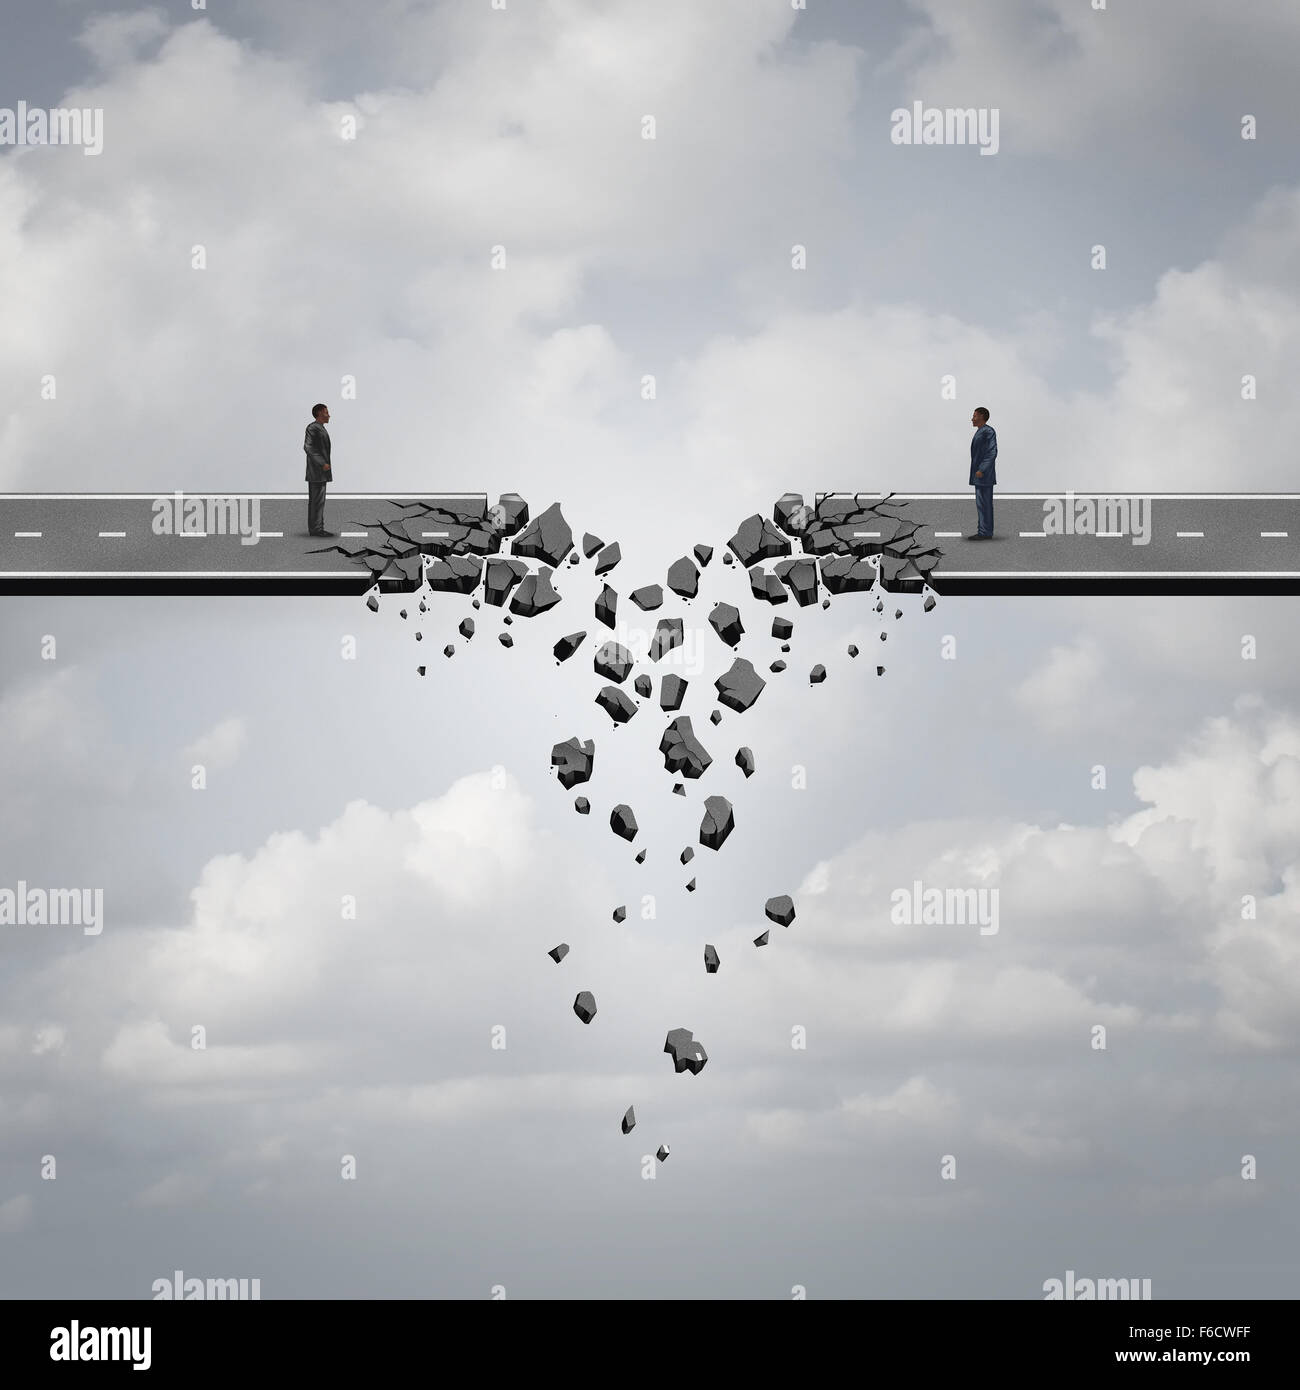 Business deal failure concept as two businessmen on a road bridge that is breaking down and disconnecting as a failing corporate relationship crisis symbol. Stock Photo